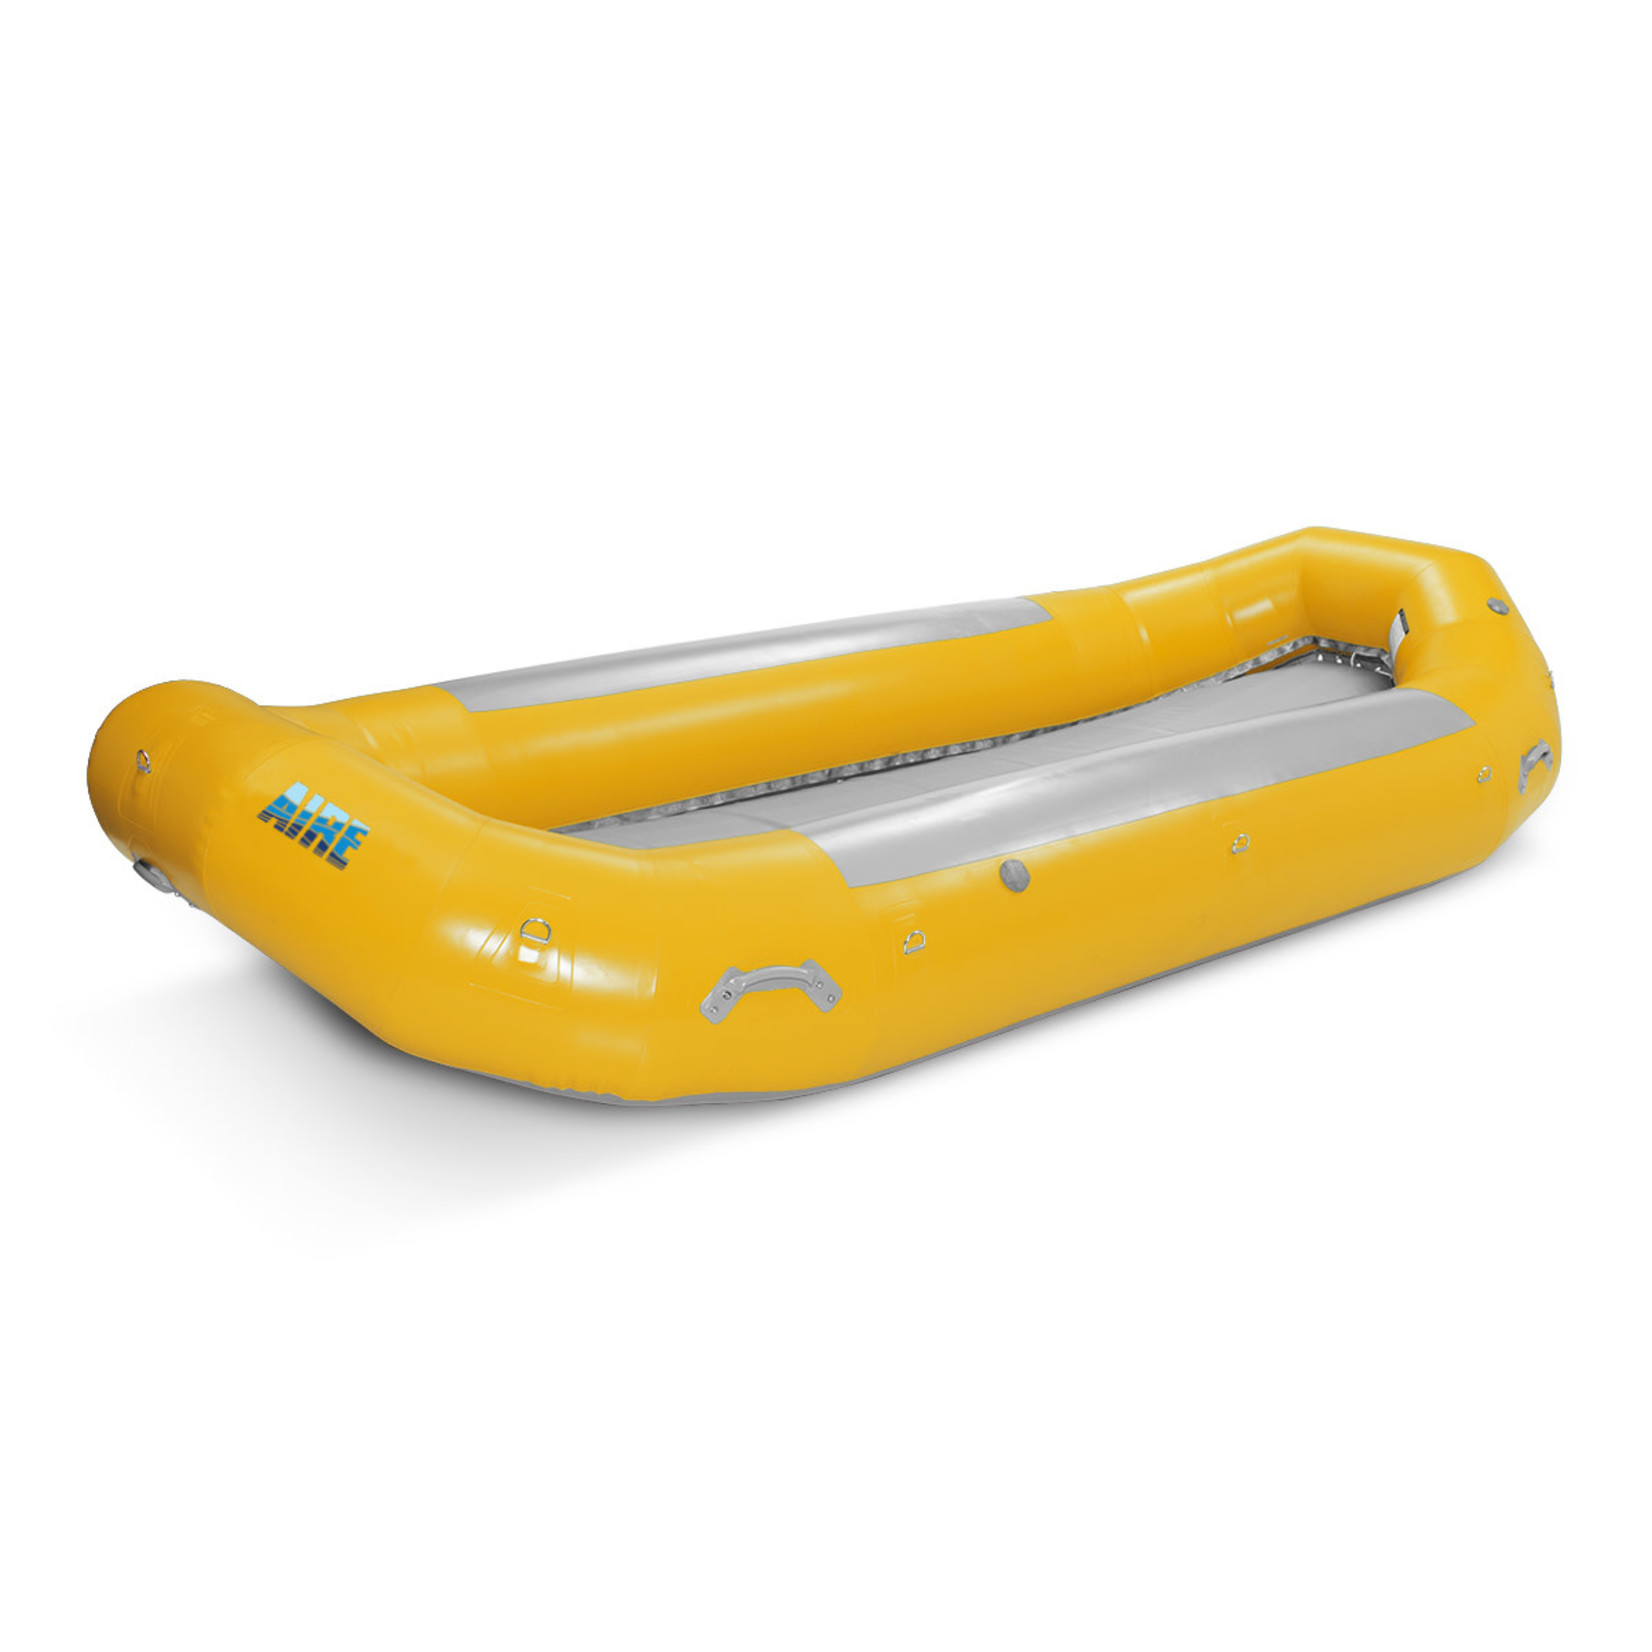 AIRE AIRE 136DD Self-Bailing Raft